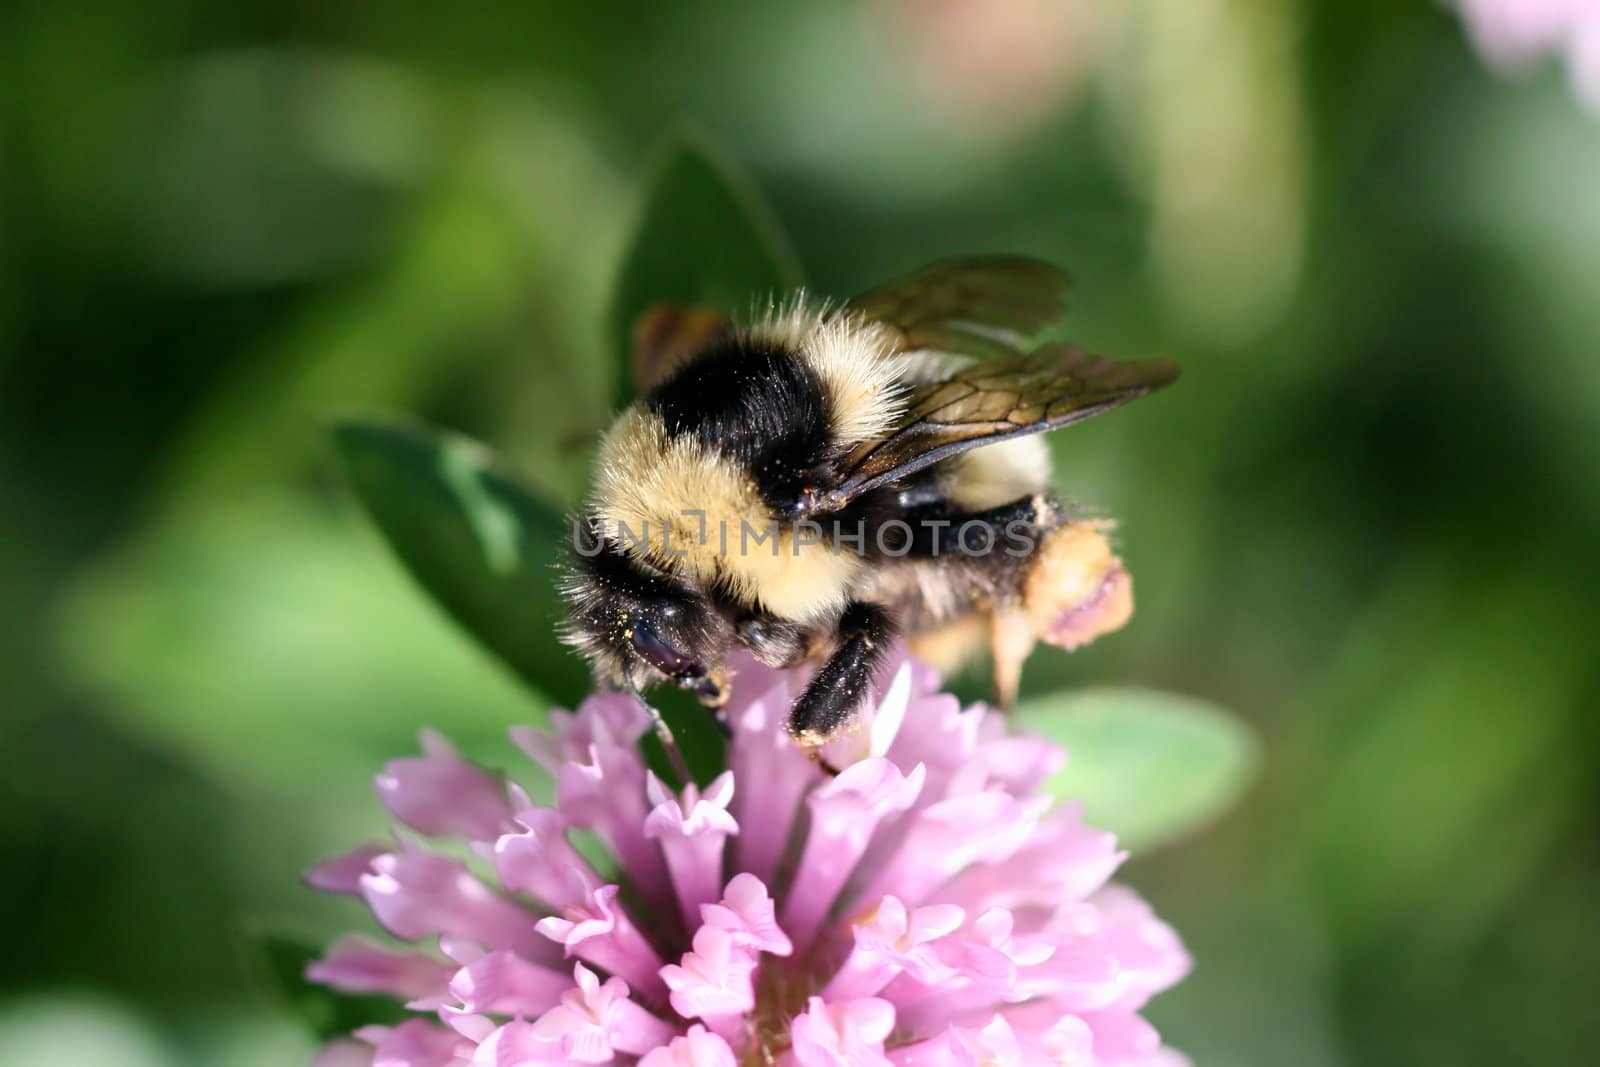 Bumblebee on red clover by monner